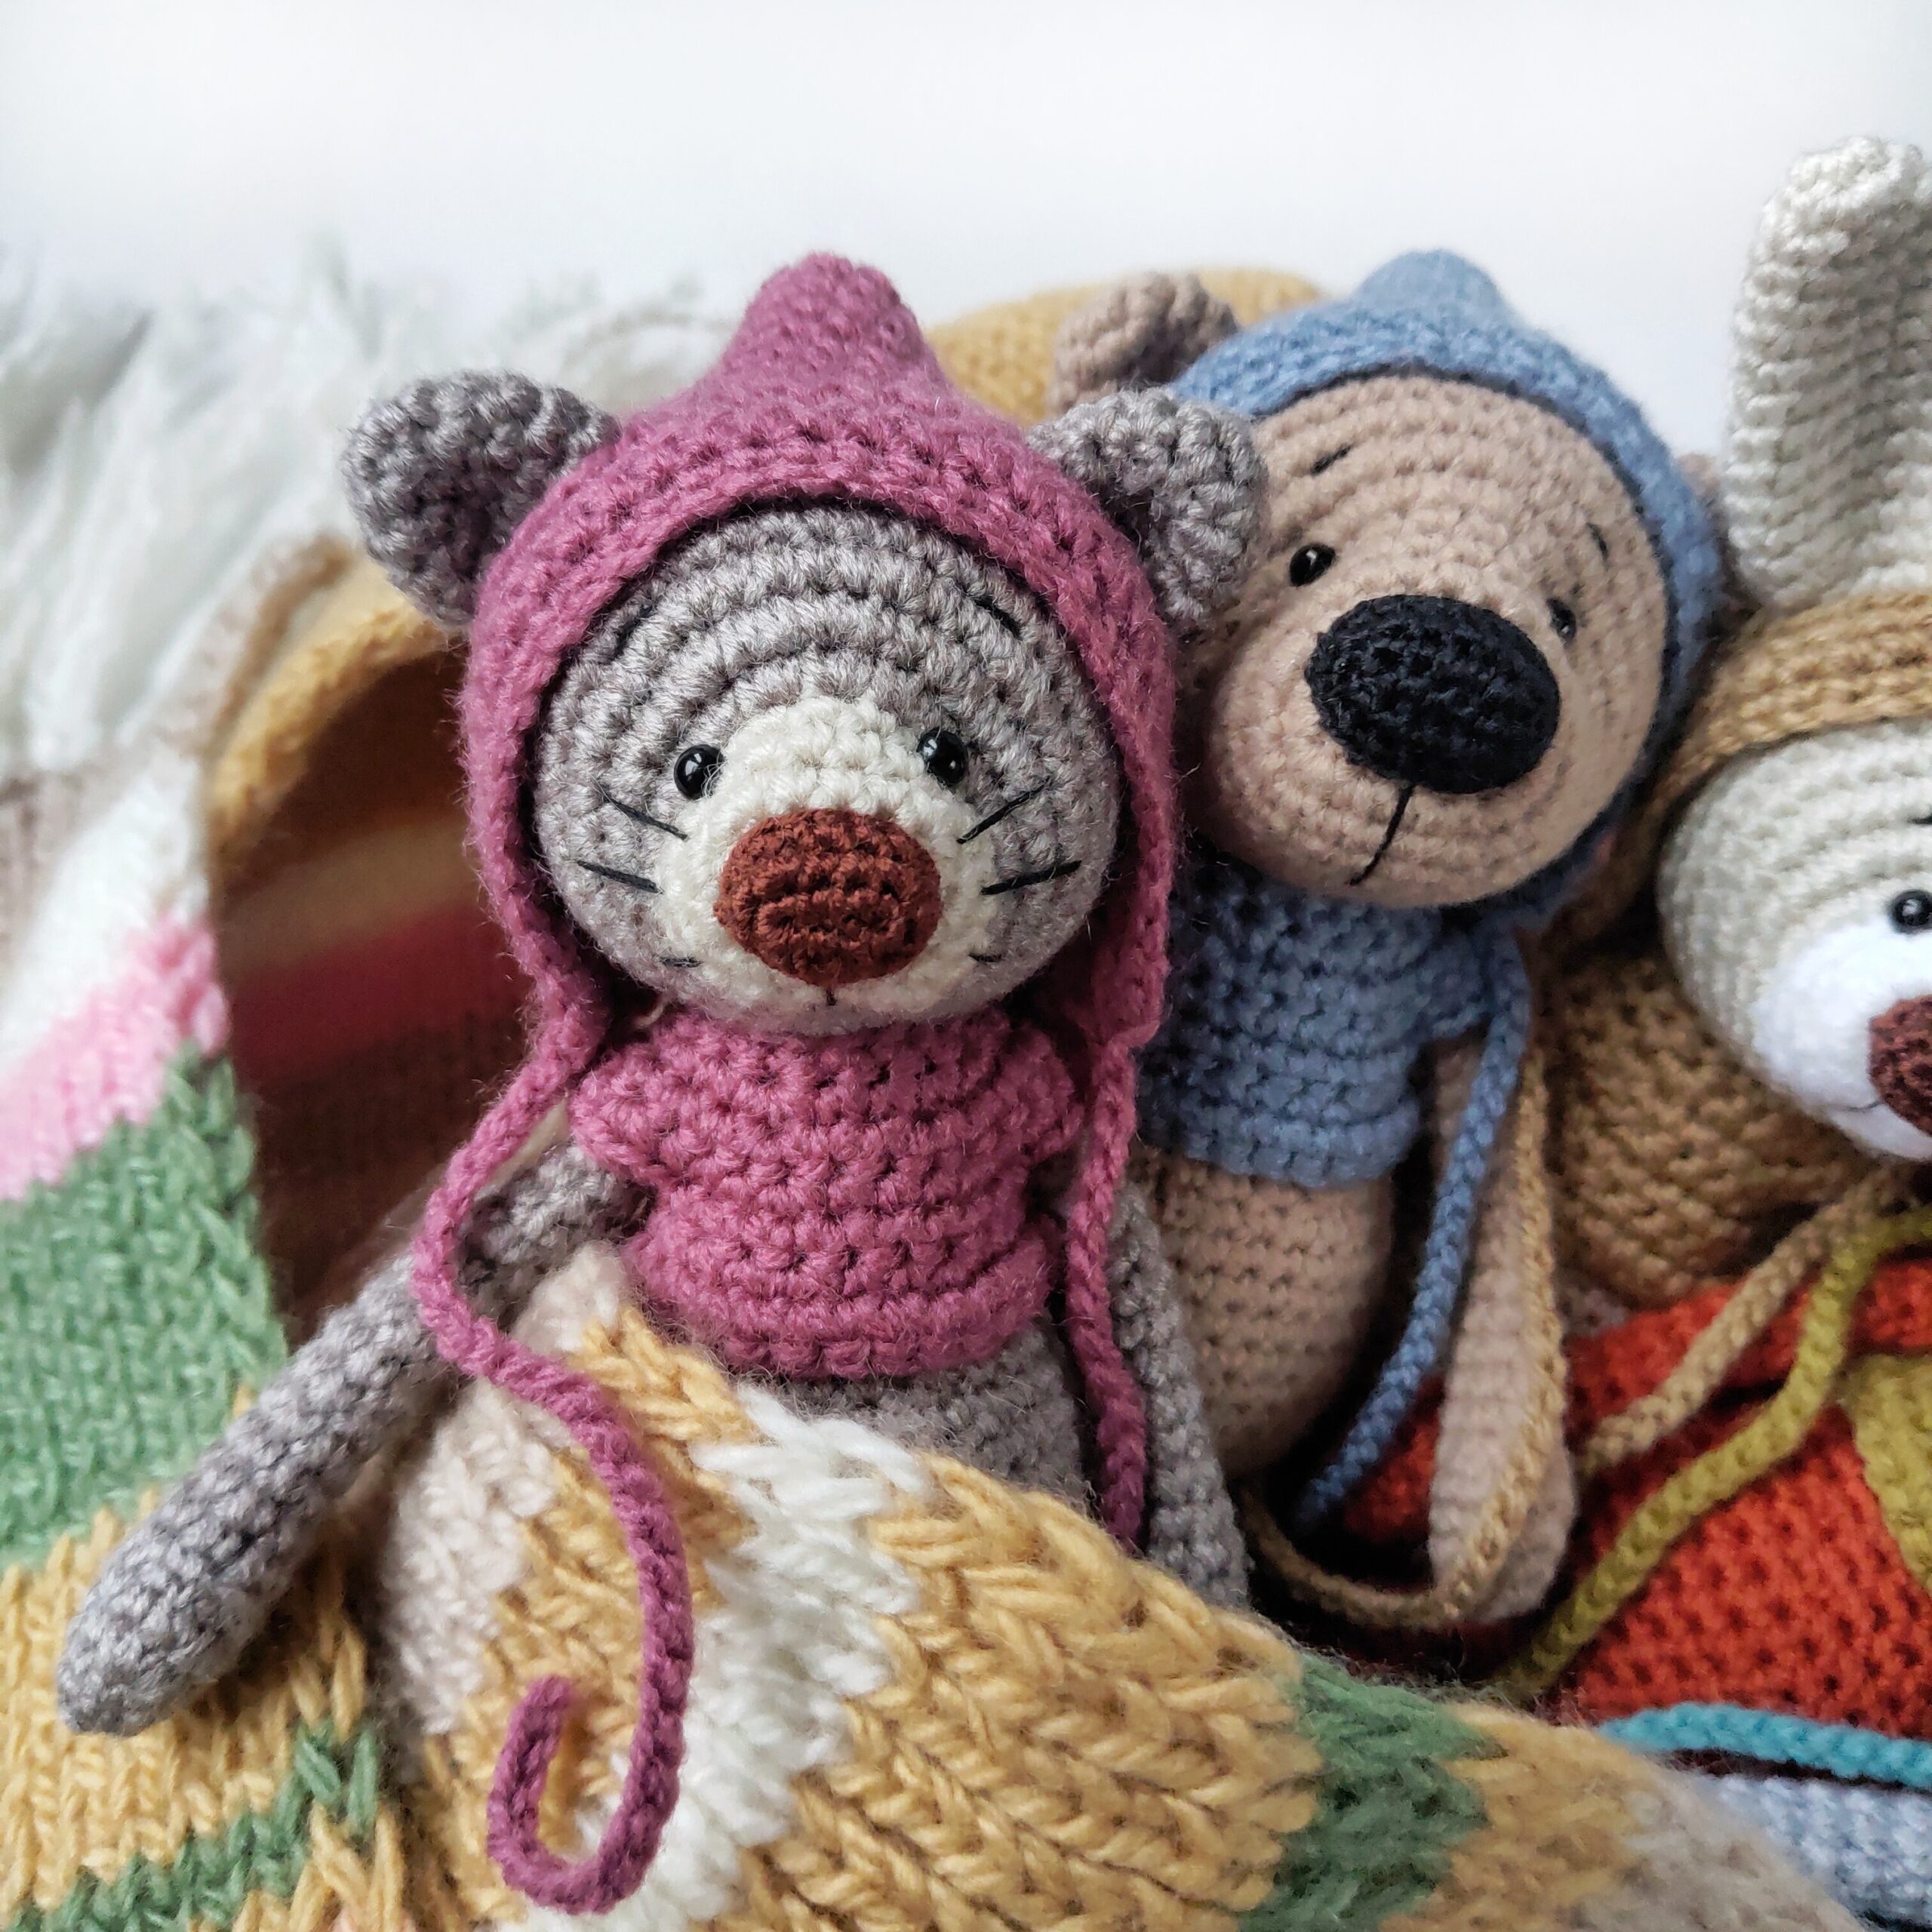 Crocheting stuffed animals from Top This! yarn.